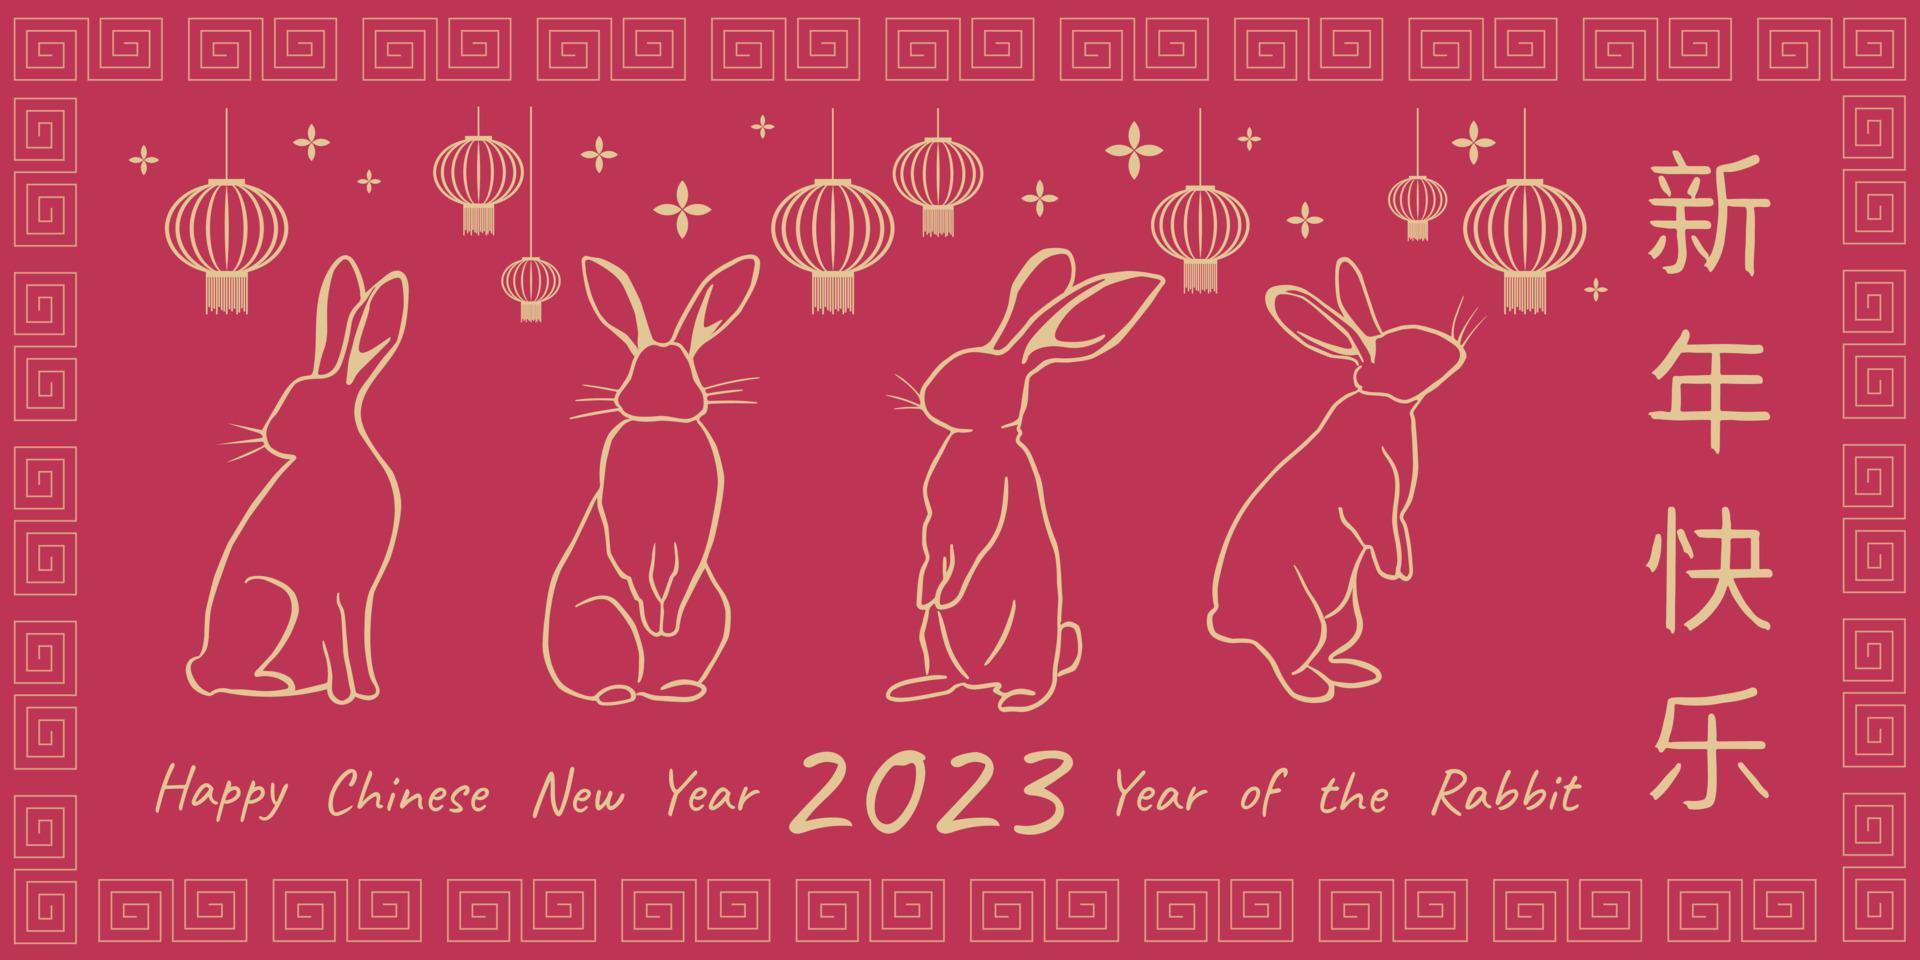 Chinese new year 2023 year of the rabbit. Greeting card with traditional zodiac symbol - rabbits. Outlines golden rabbits with chinese lanterns on the viva magenta background with chinese greetings. vector